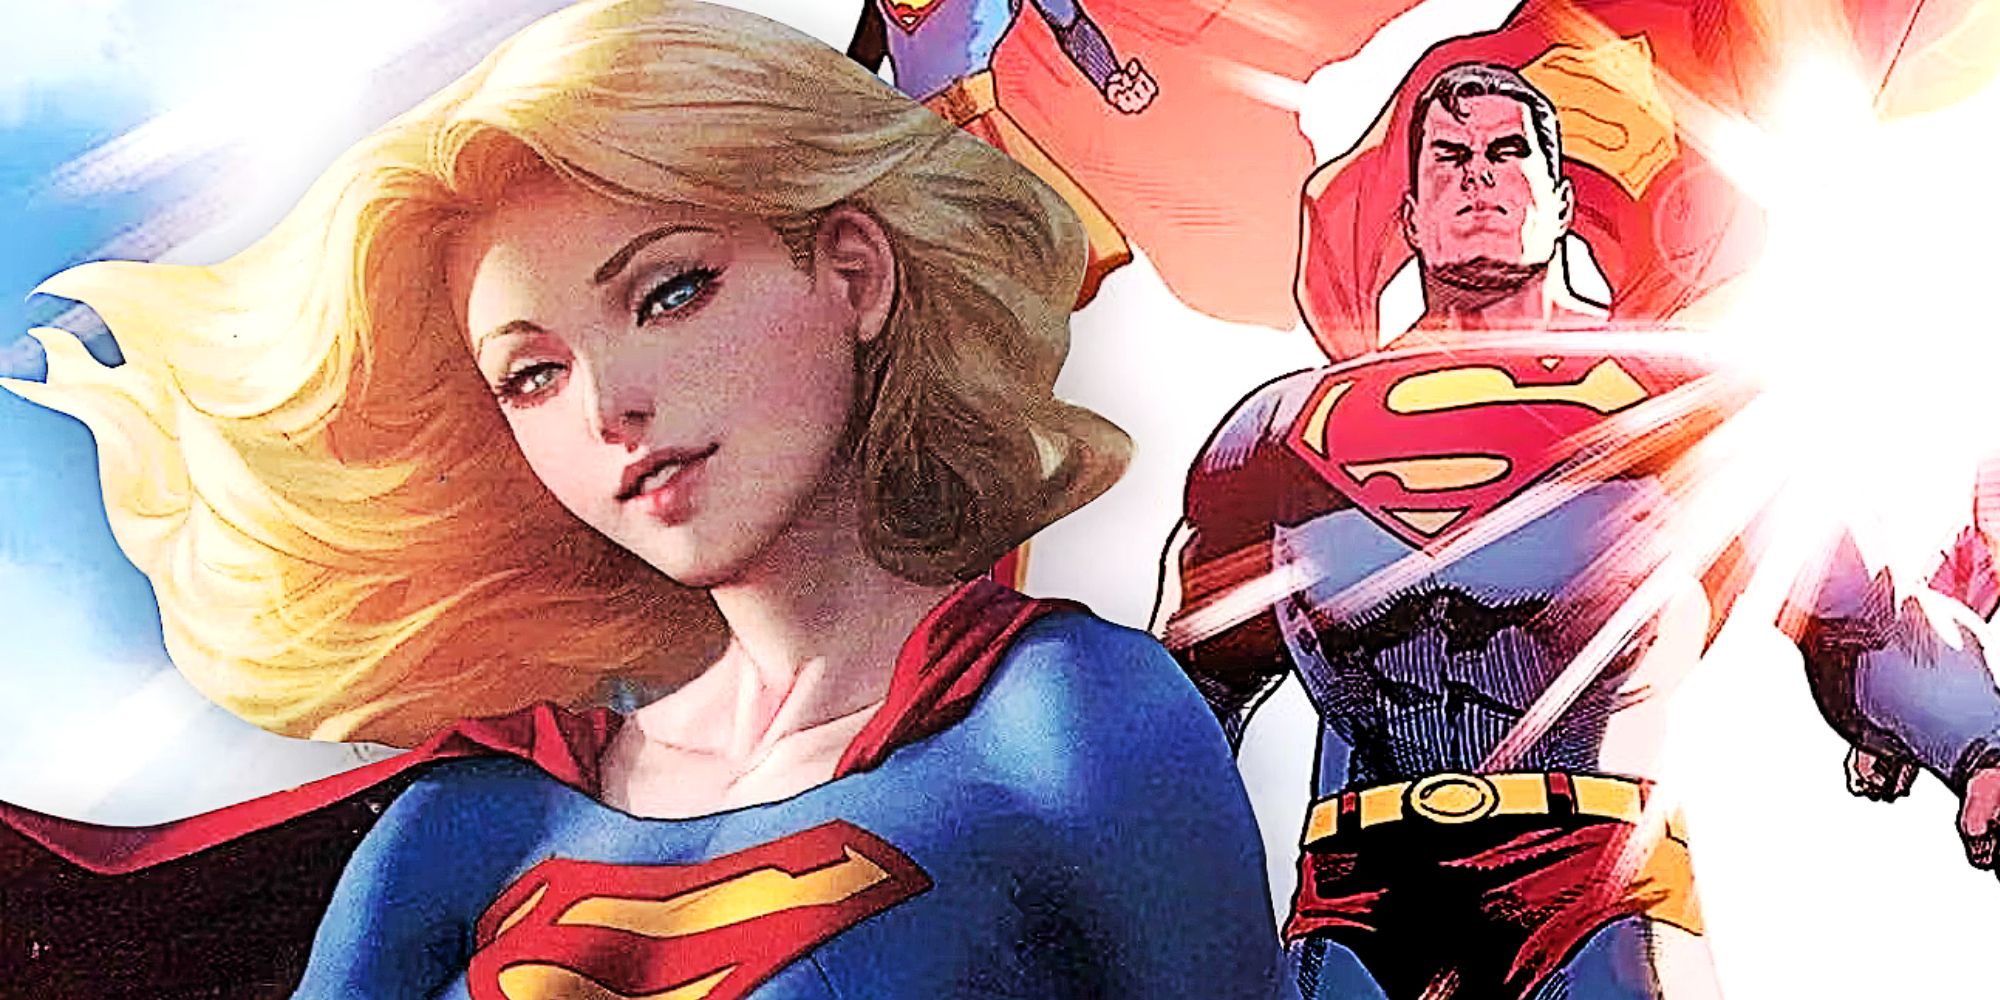 Supergirl and Superman in DC Comics